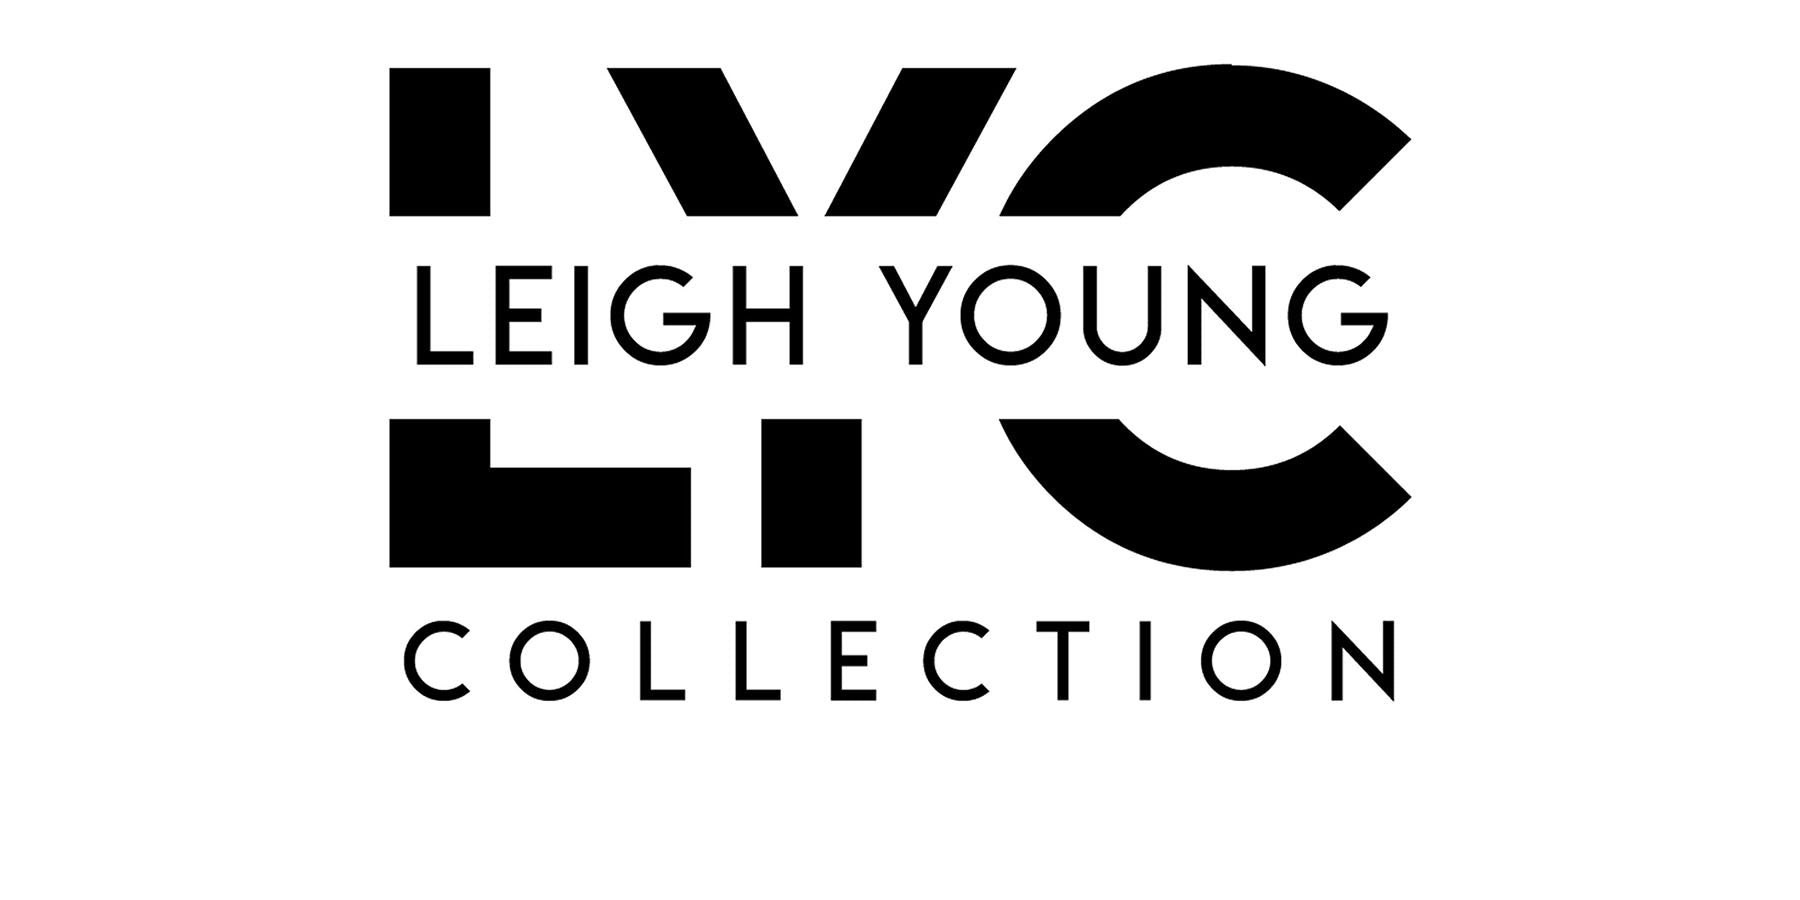 Leigh Young Collection logo - resort and Leisure wear clothing line handsewn in Seattle WA USA